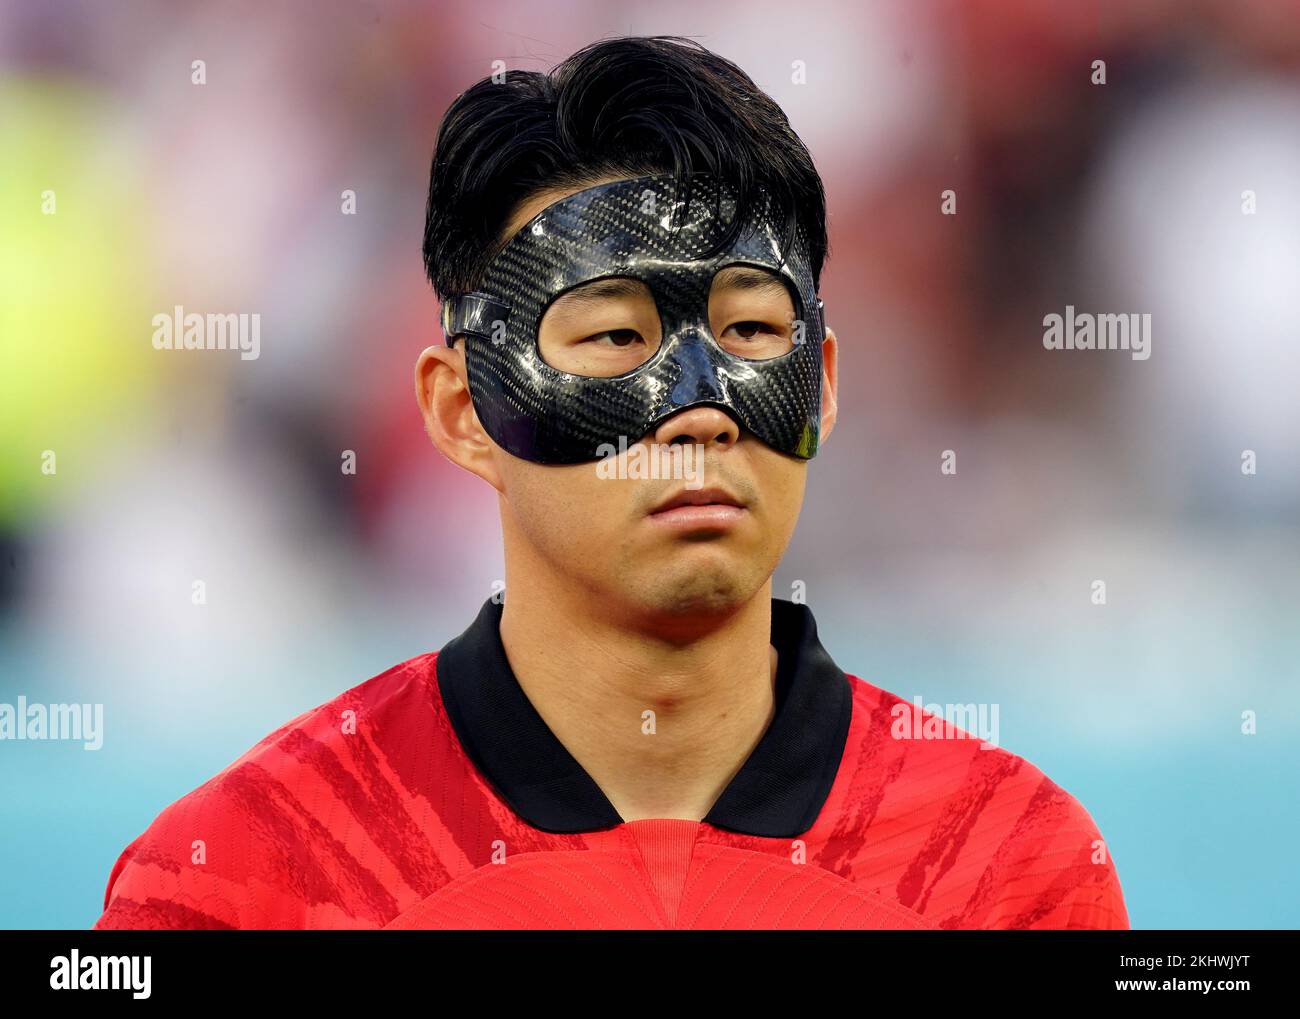 South Korea's Son Heung-min during the FIFA World Cup Group H match at the Education City Stadium, Doha, Qatar. Picture date: Thursday November 24, 2022. Stock Photo